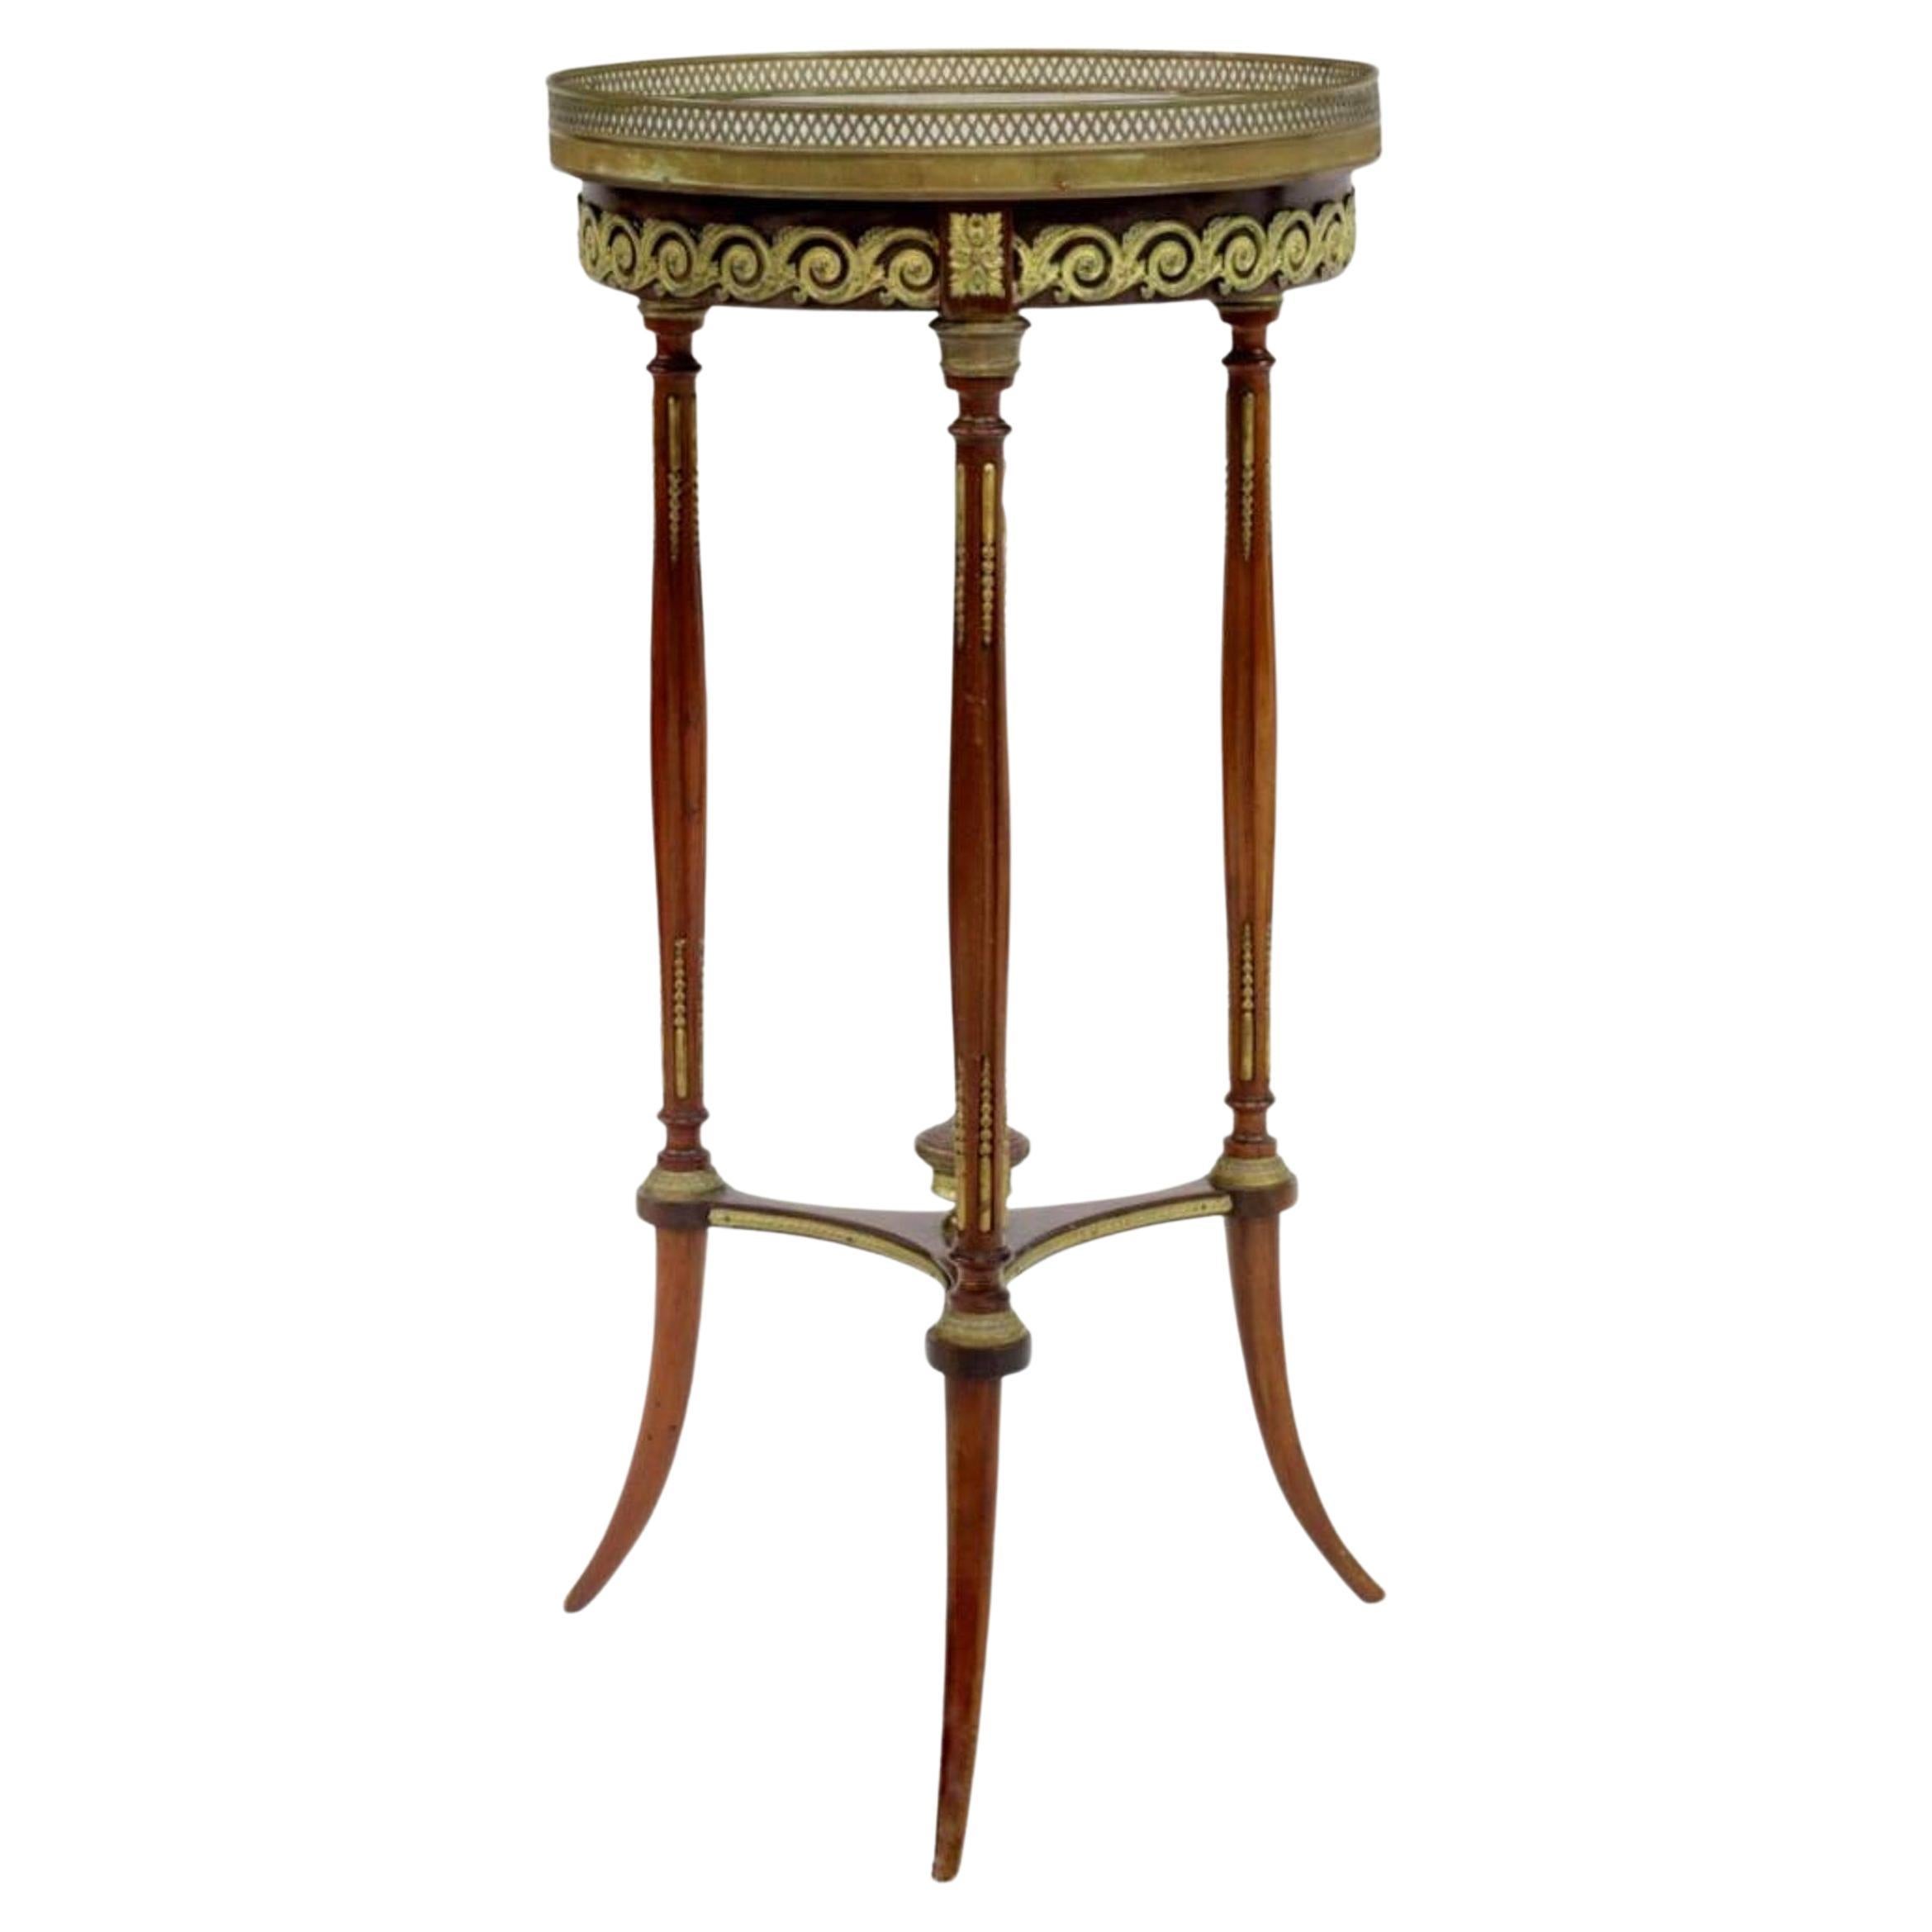 Antique French Louis XVI Style Mahogany Gilt Brass Pedestal Table